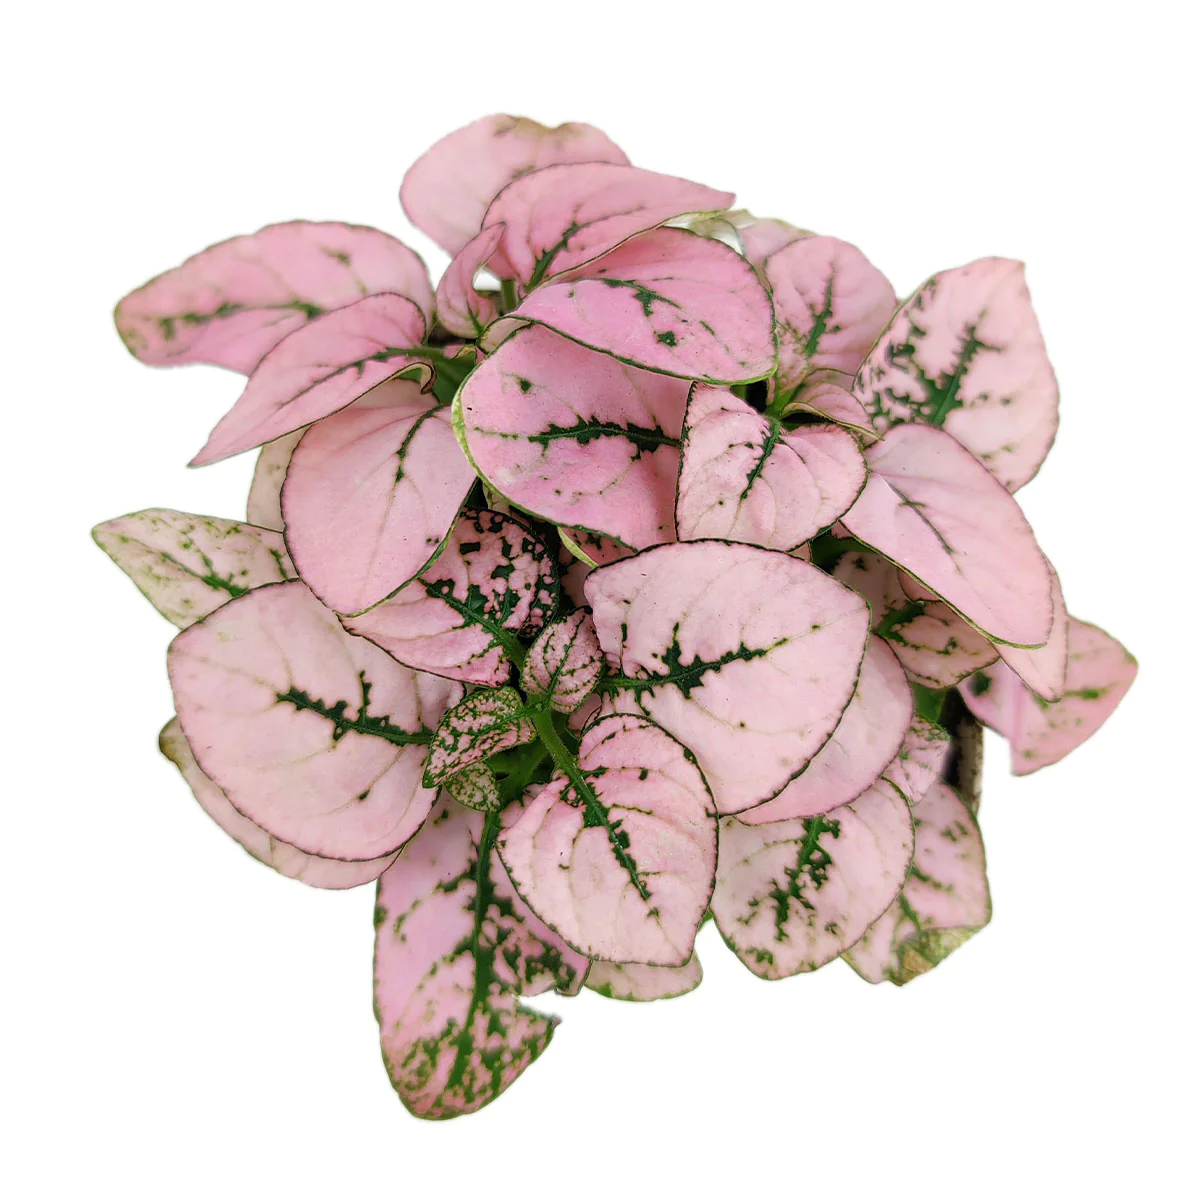 Pink blotches on leaves of healthy plants